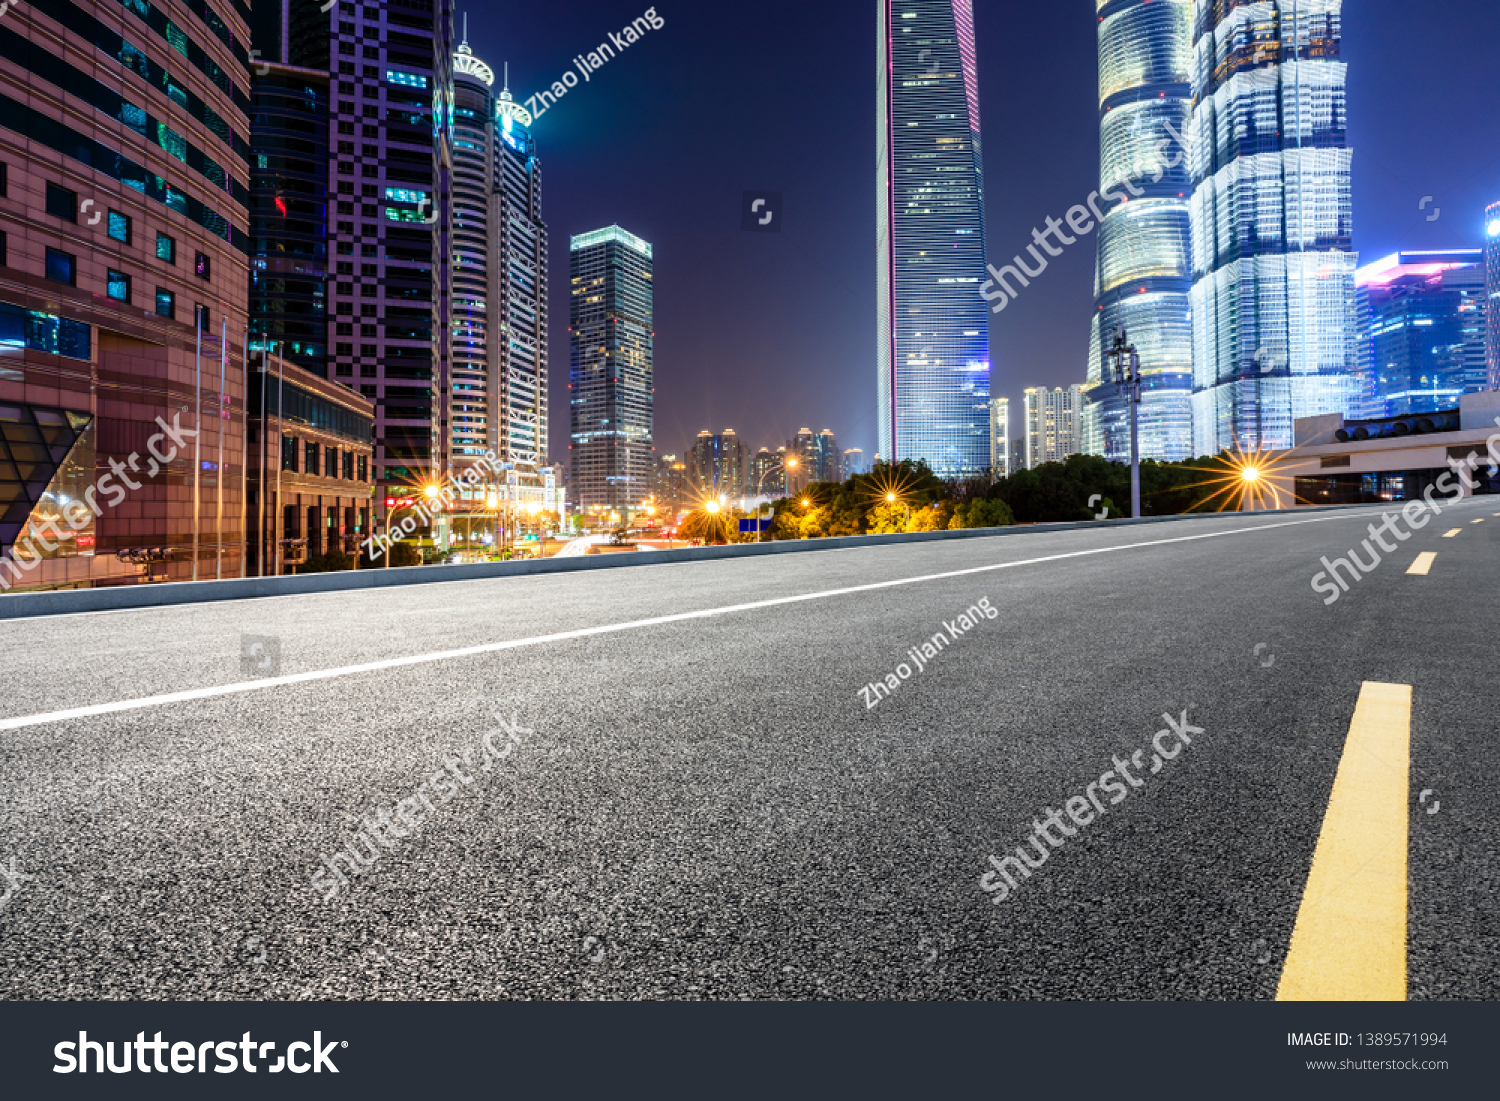 Shanghai modern commercial office buildings and empty asphalt highway at night #1389571994